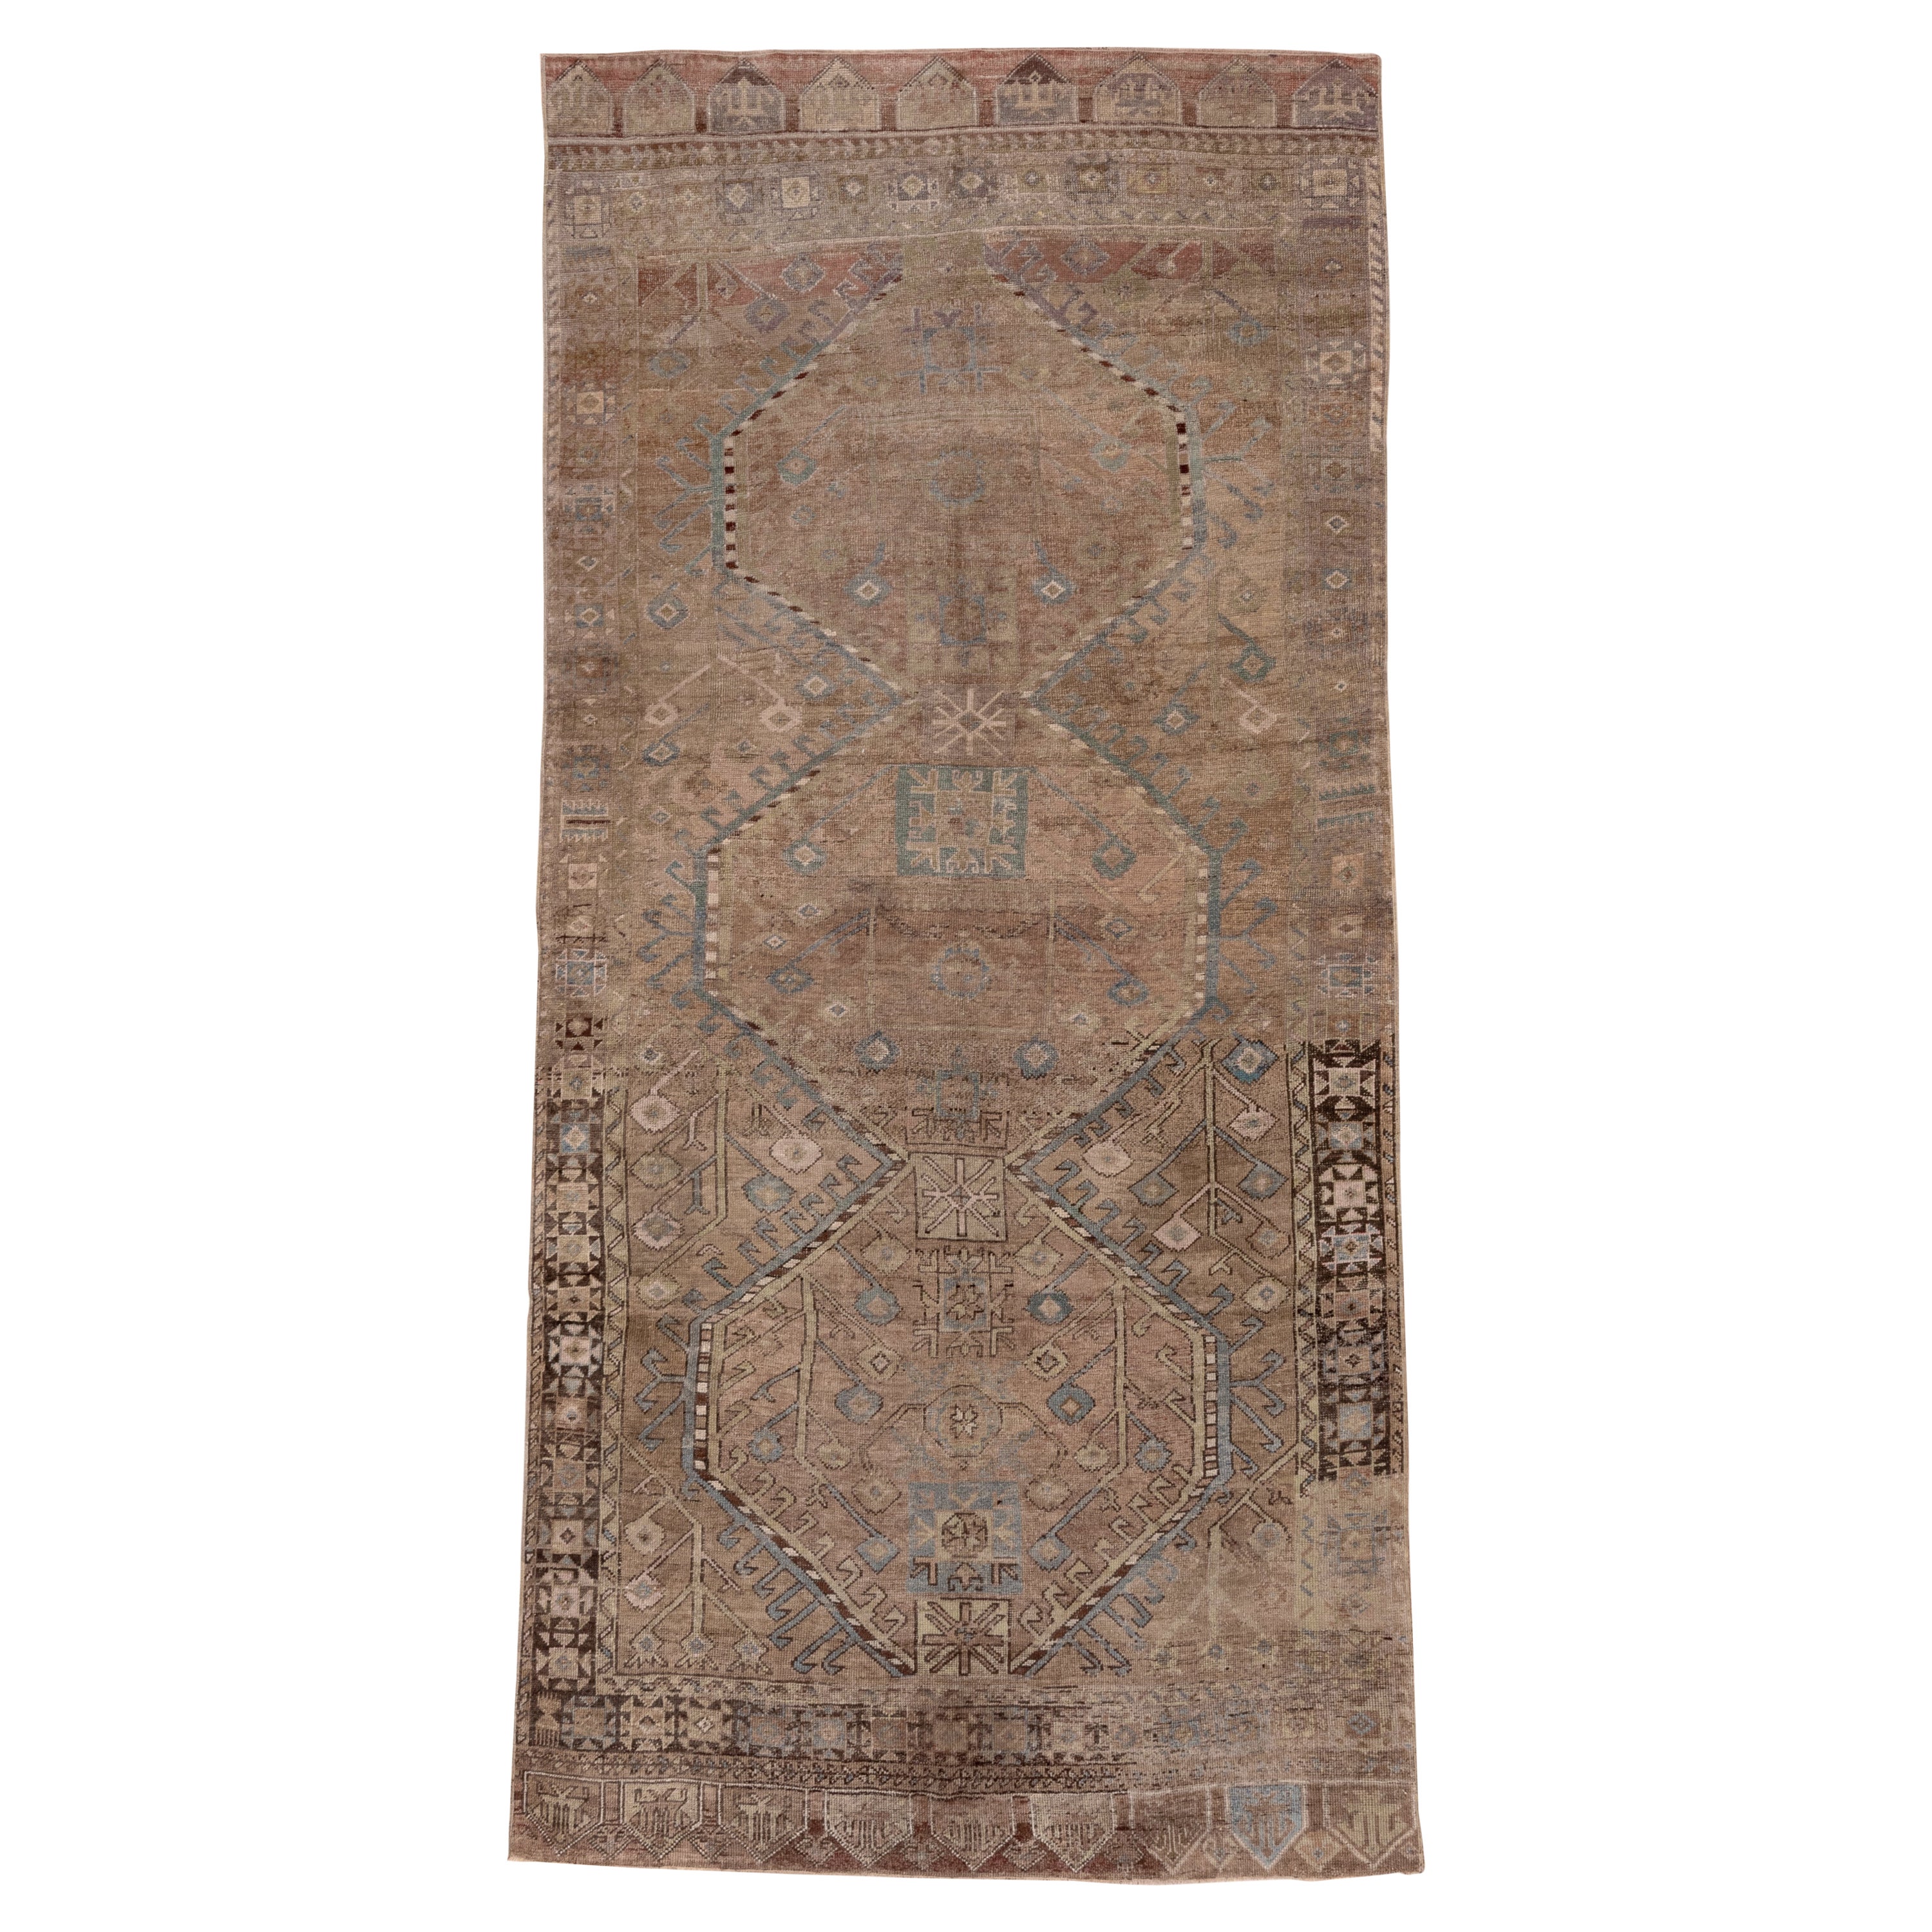 Mid 20th Century Turkish Oushak Gallery Rug, Brown Field & Blue Accents For Sale